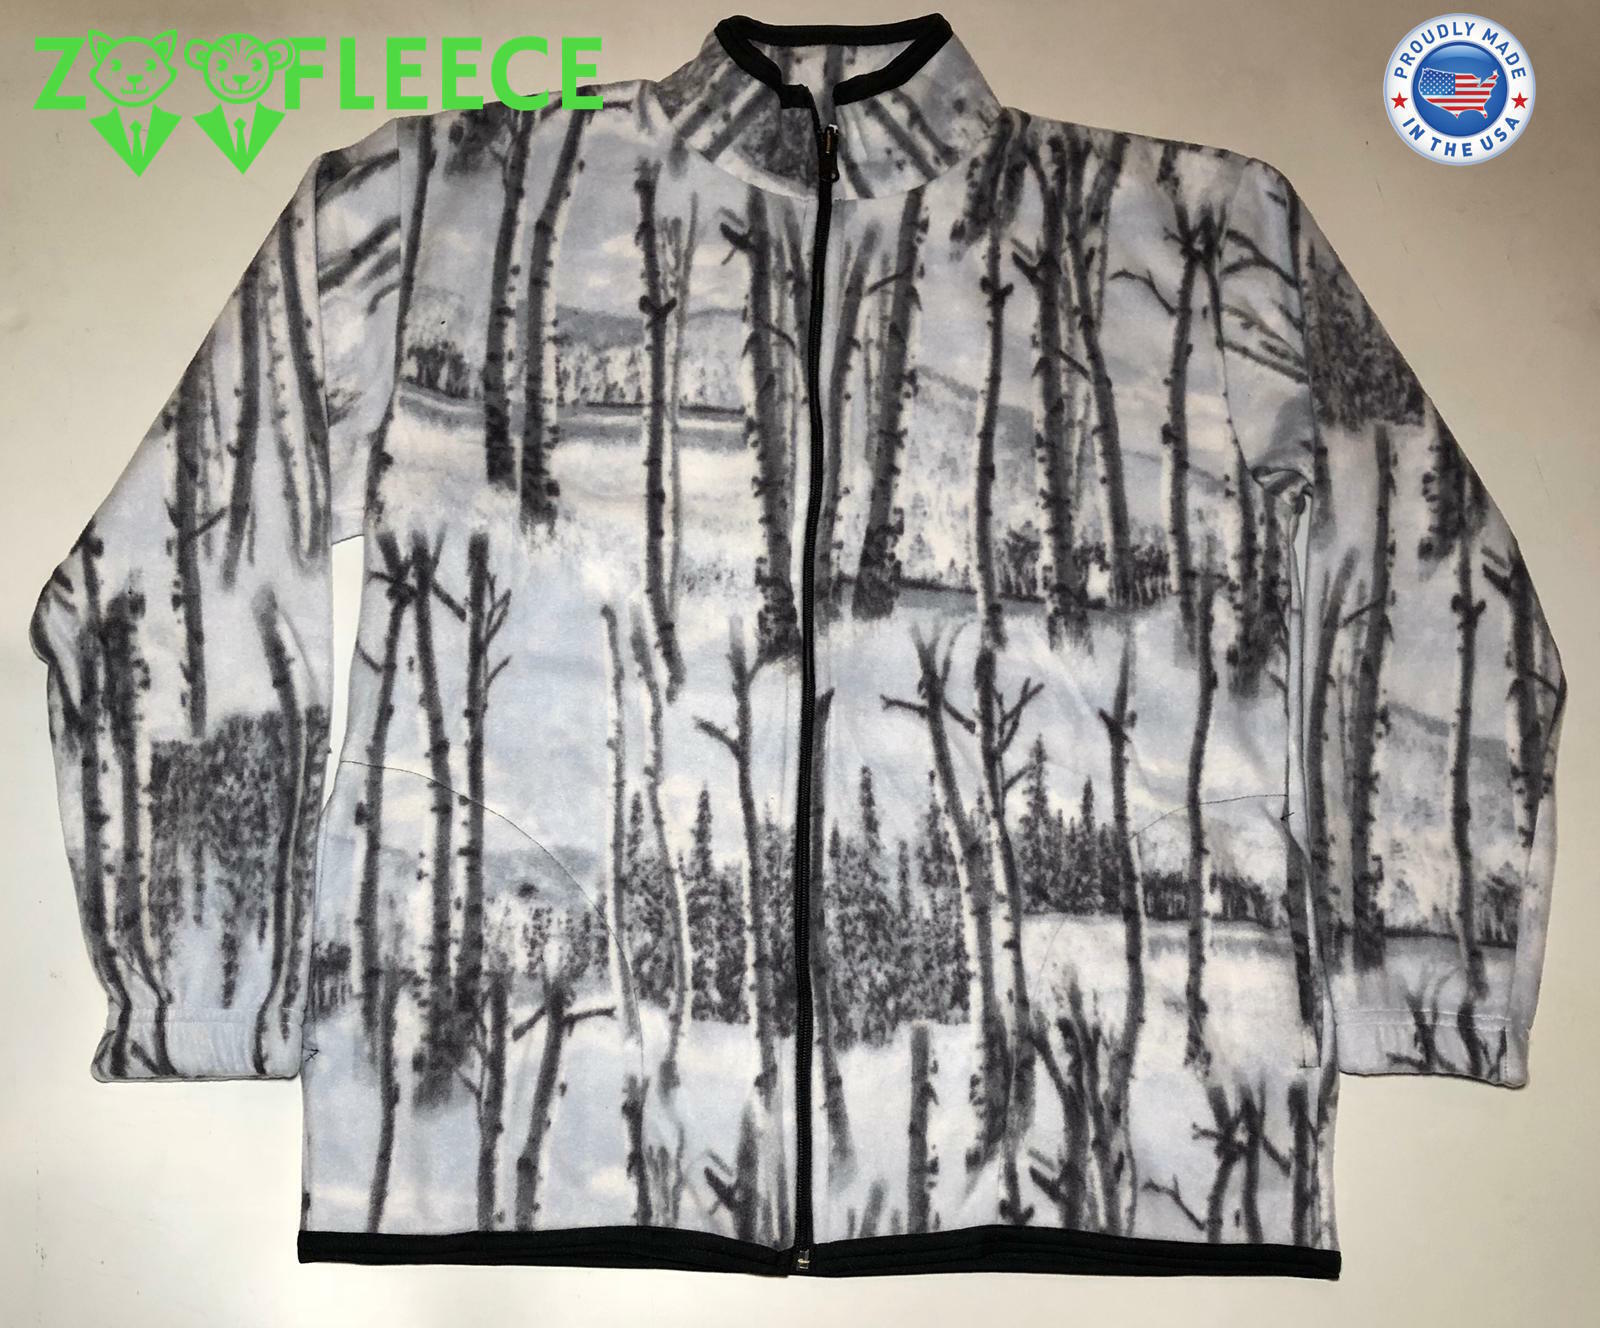 ZooFleece White Snow Birch Camouflage Sweater Hunting Jacket Winter Gift S-3X